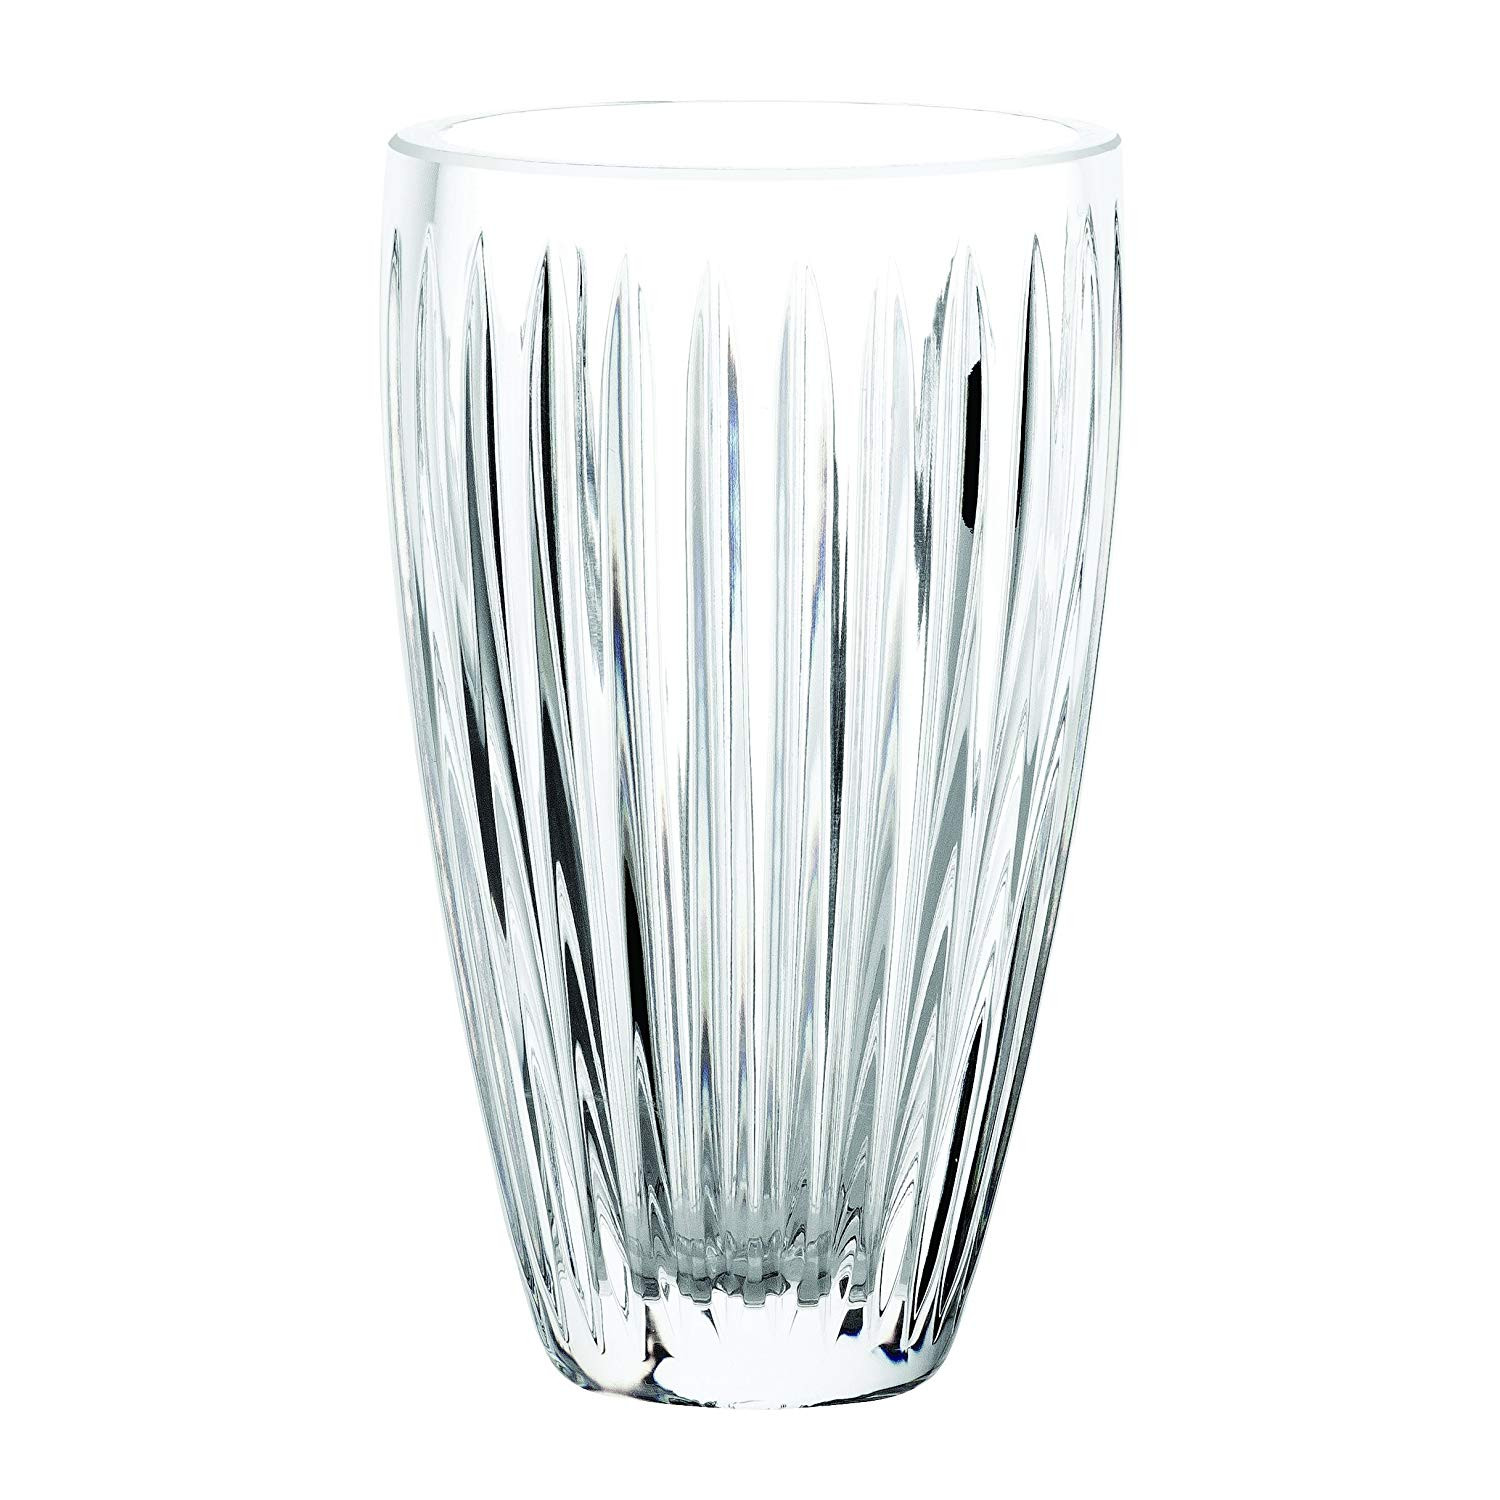 25 Great Marquis by Waterford Markham Vase 2024 free download marquis by waterford markham vase of amazon com marquis by waterford bezel vase 7 inch home kitchen with 91mkxddybml sl1500